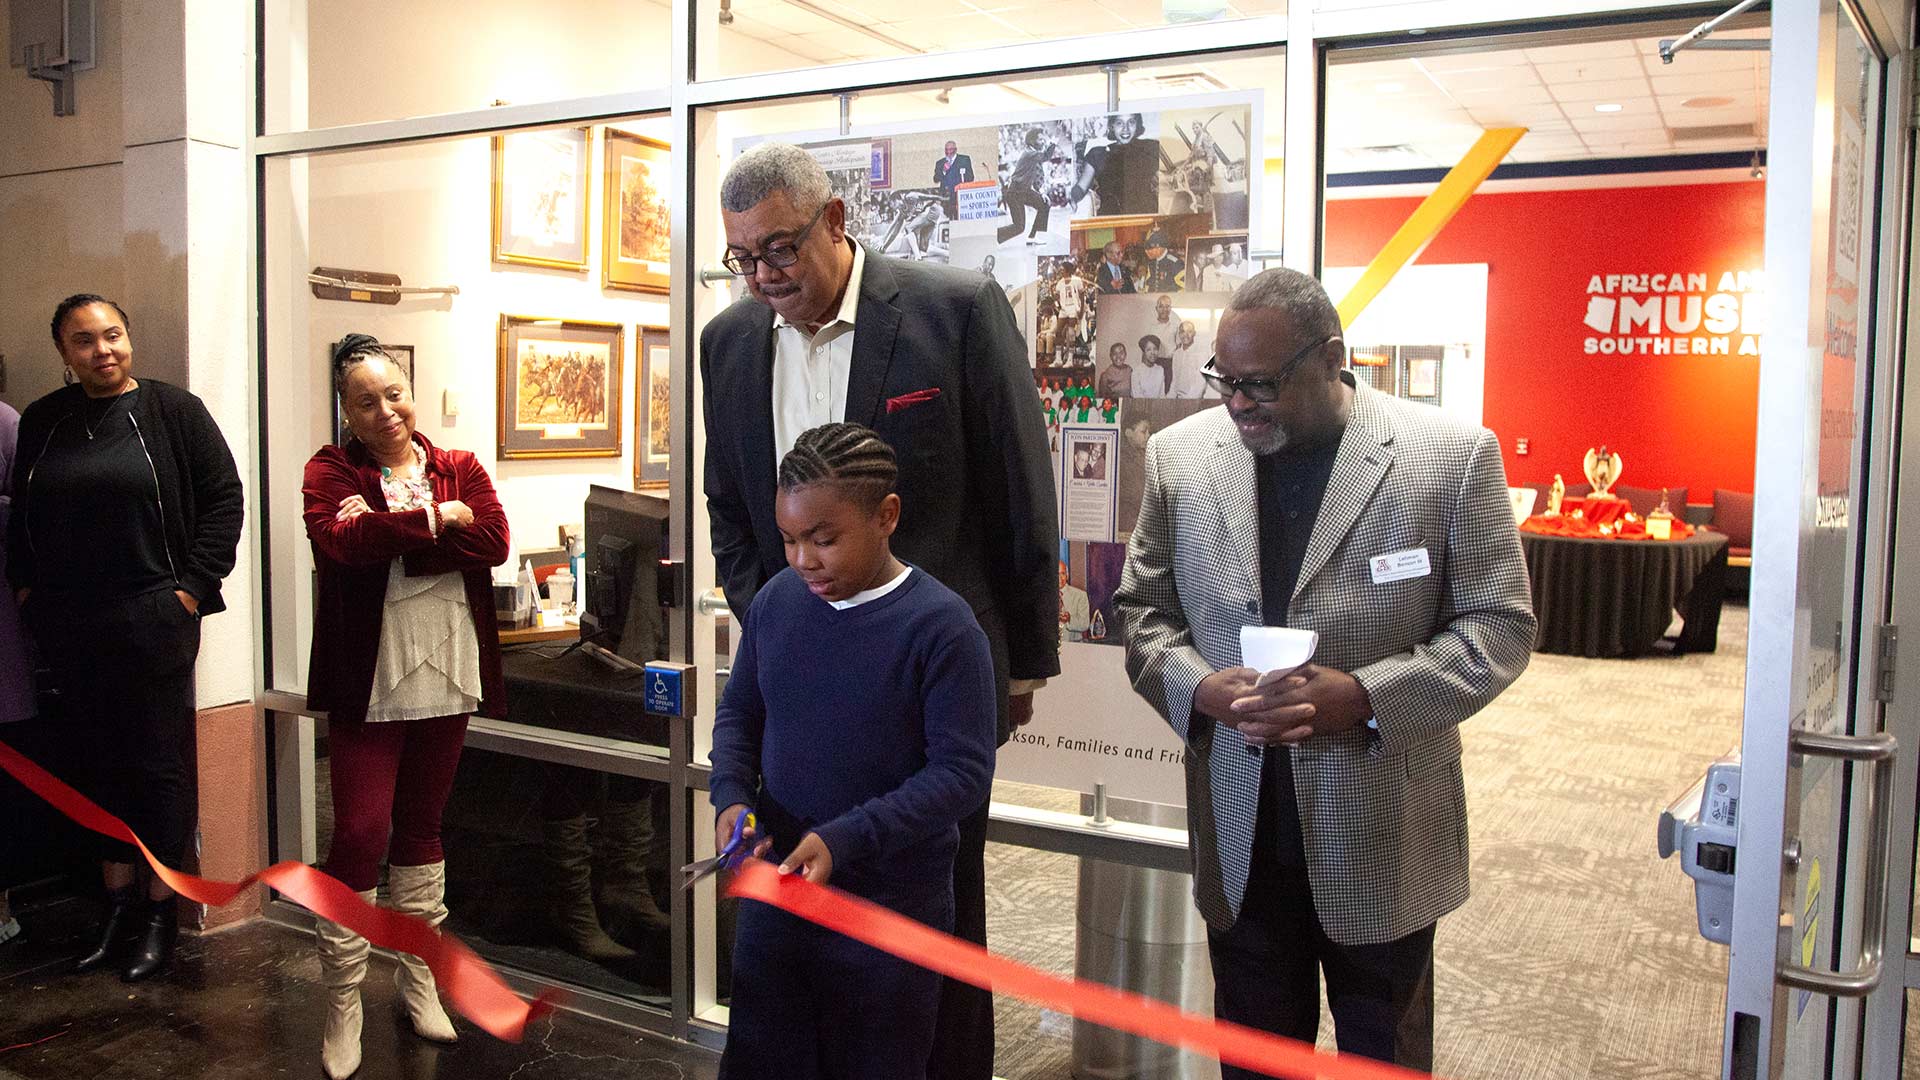 African American Museum of Southern Arizona opens